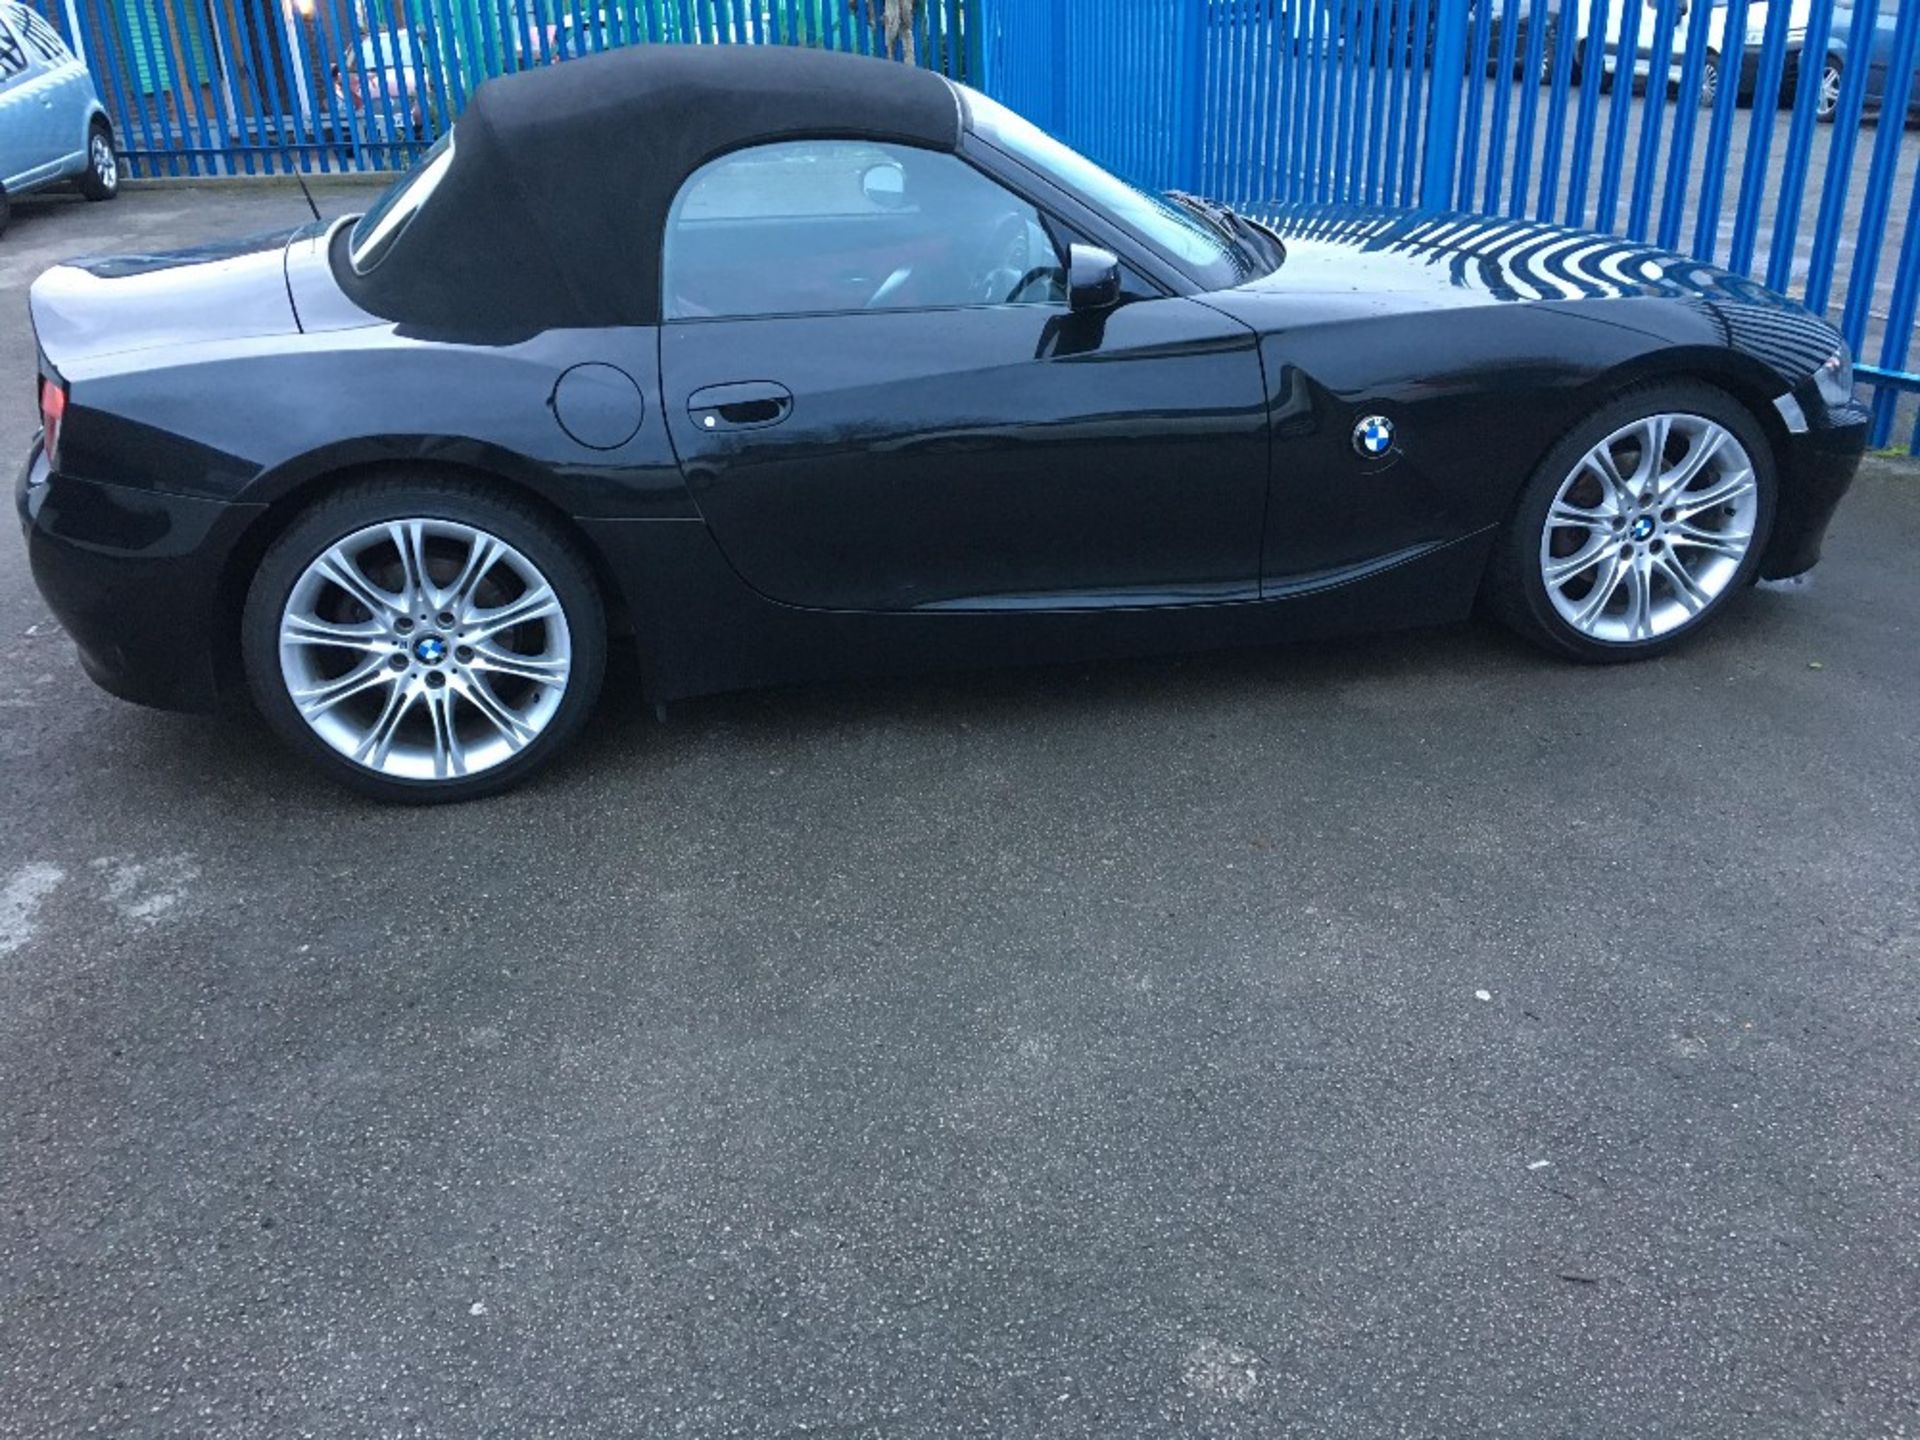 BMW Z4 Si Sports Convertible 2.5Reg: WM06 DHXMileage: Approximately 102,212MOT:24-10- - Image 5 of 17